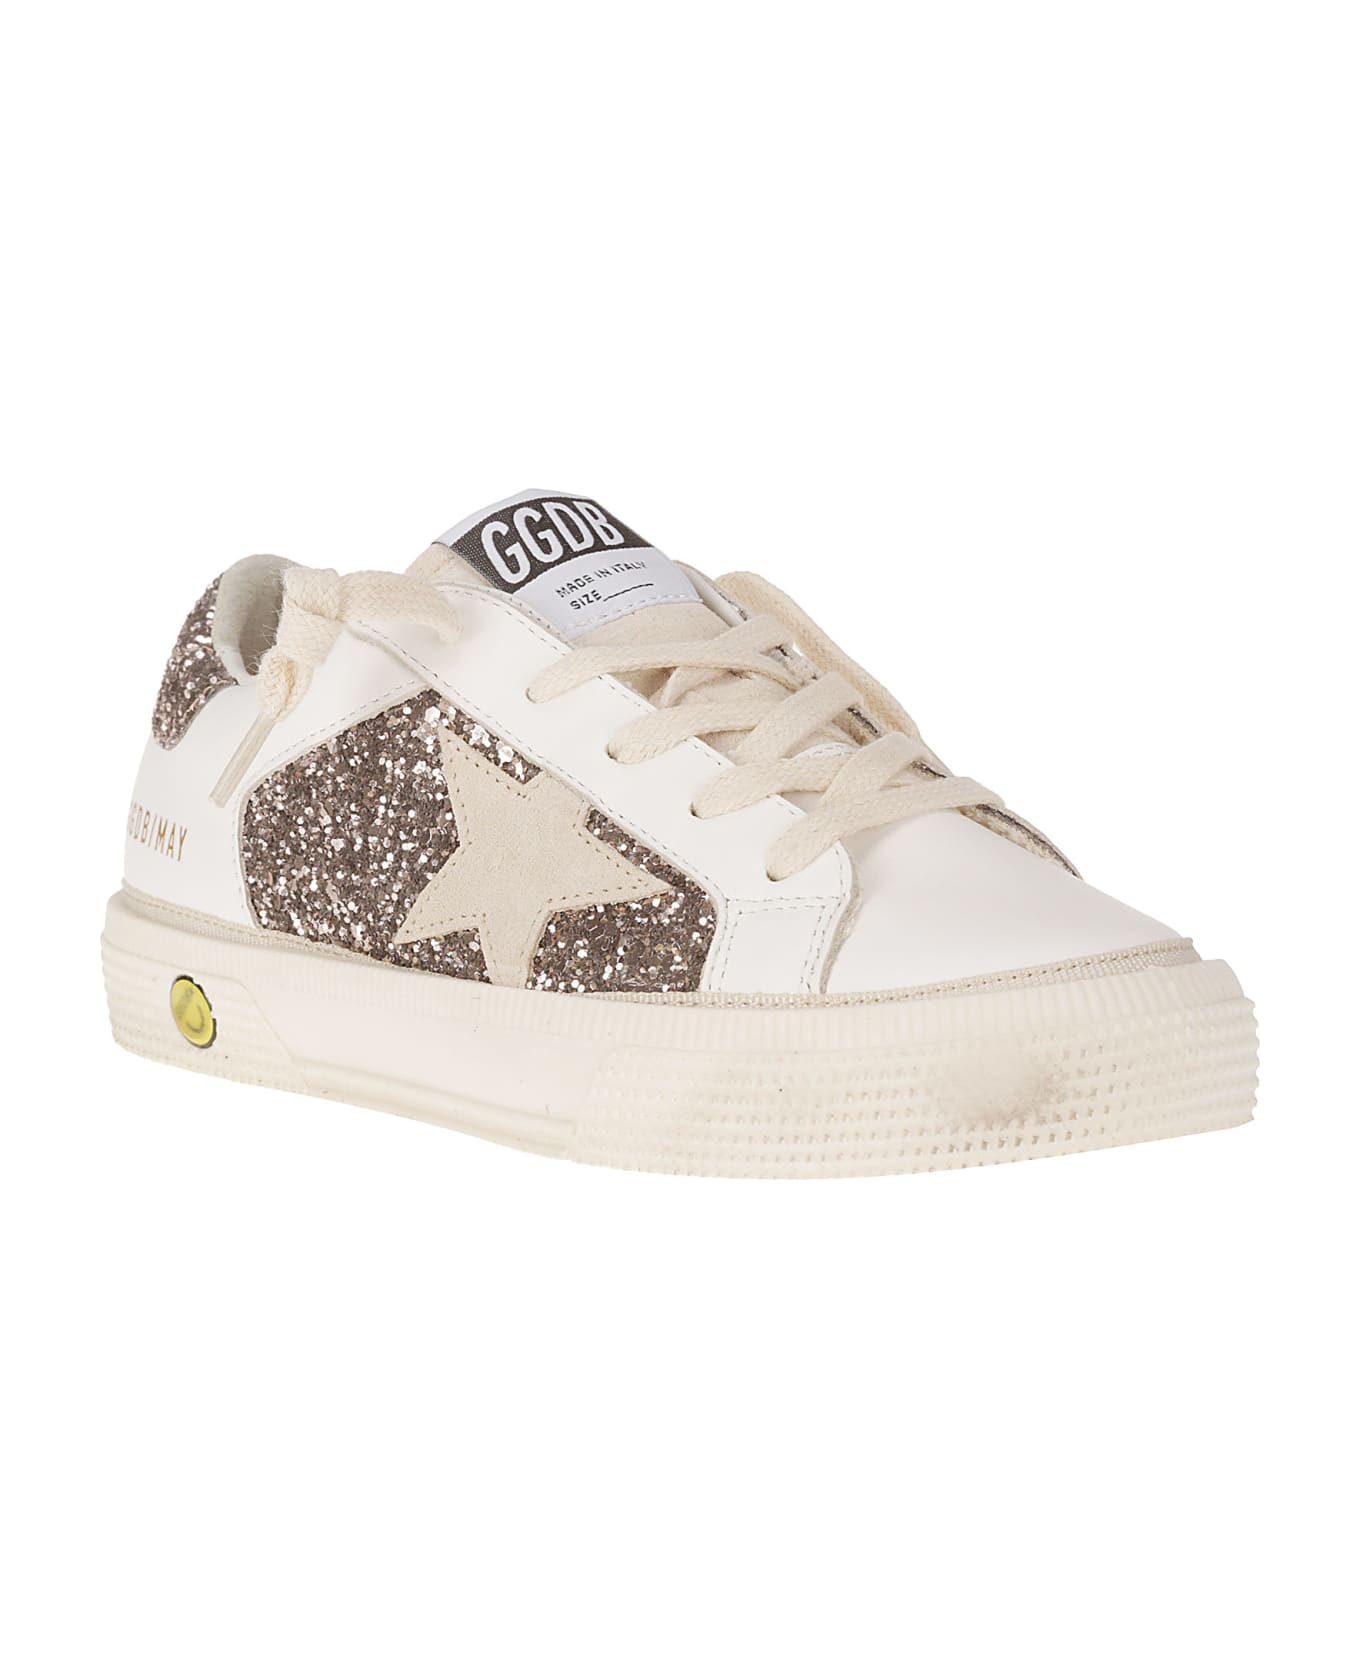 Golden Goose May Leather And Glitter Upper Suede Star Glitte - OPTIC WHITE/CINDER/SEED PEARL